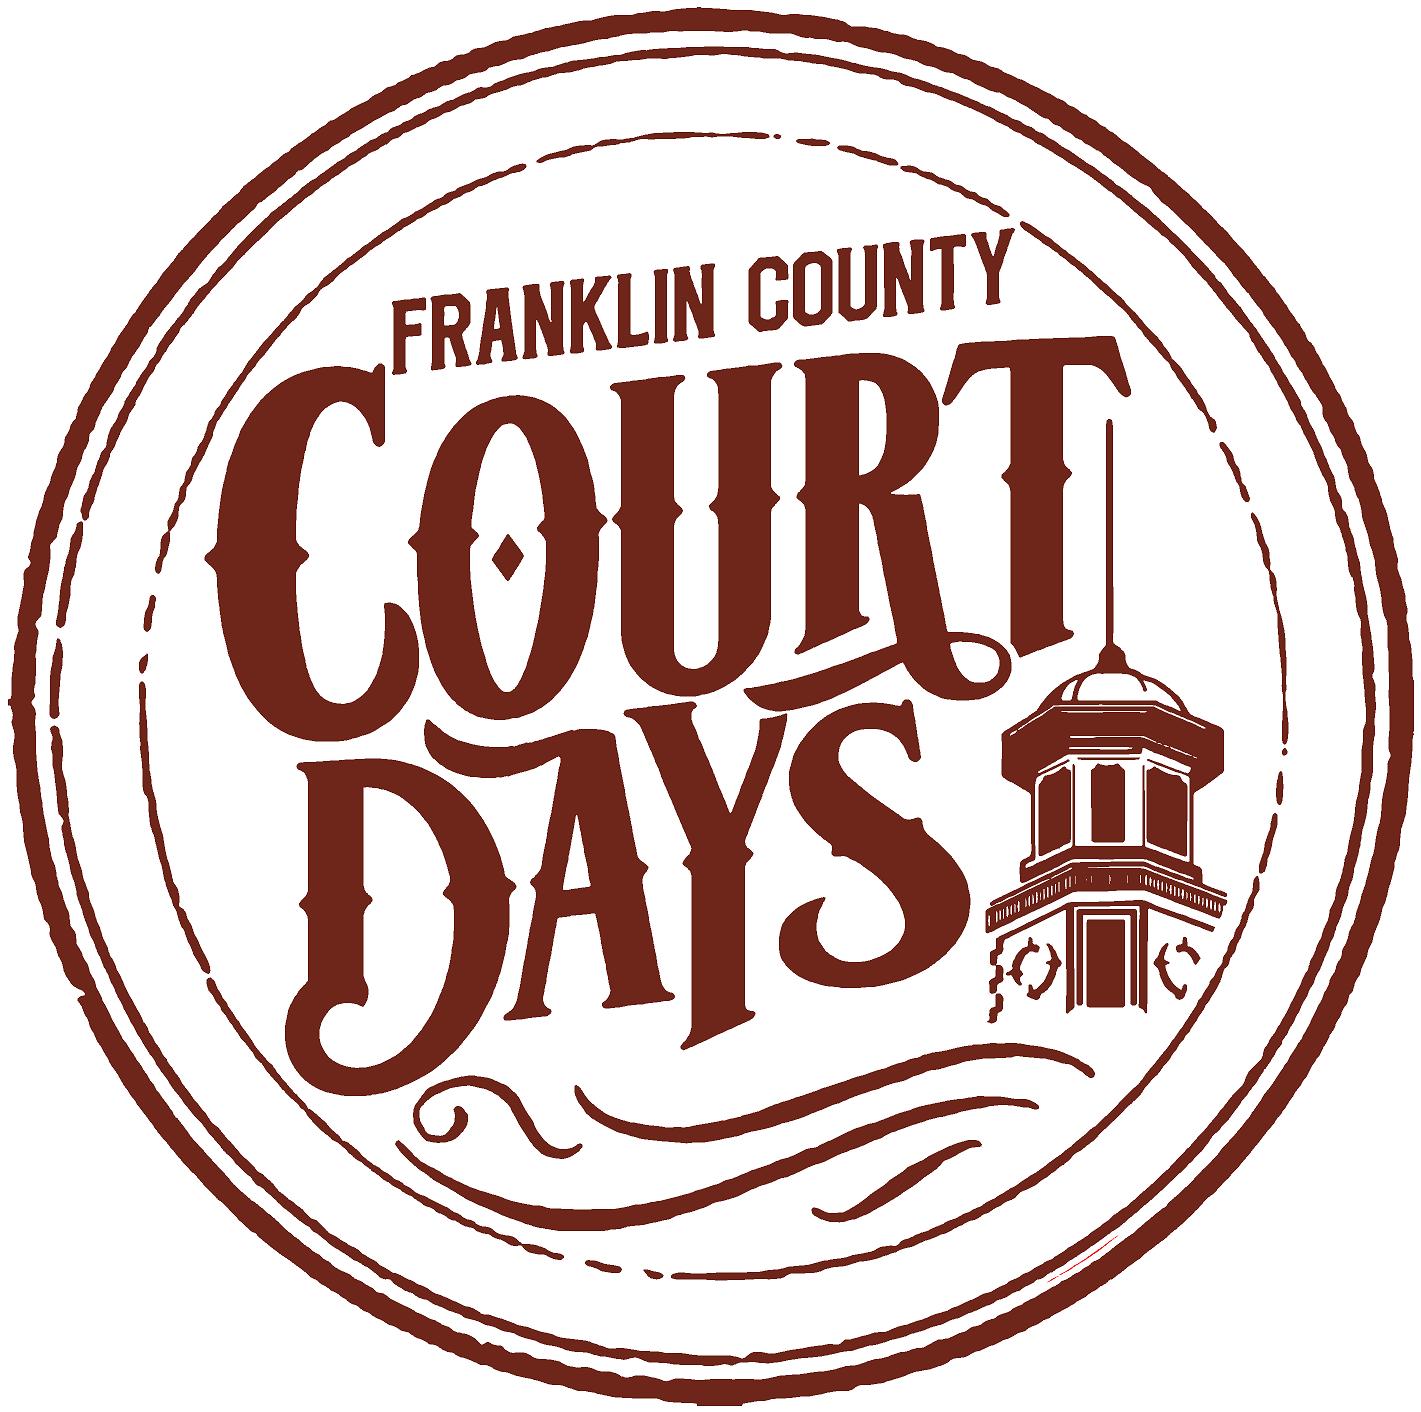 Celebrate Court Days in Franklin County on Saturday, June 13